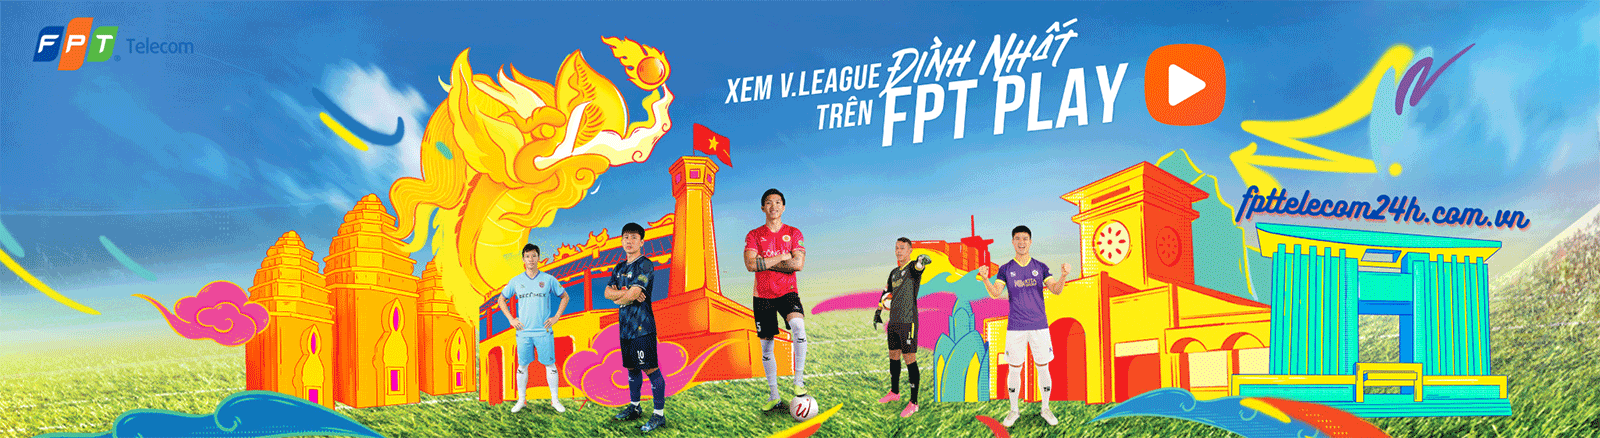 truyền hình fpt play banner fpt play